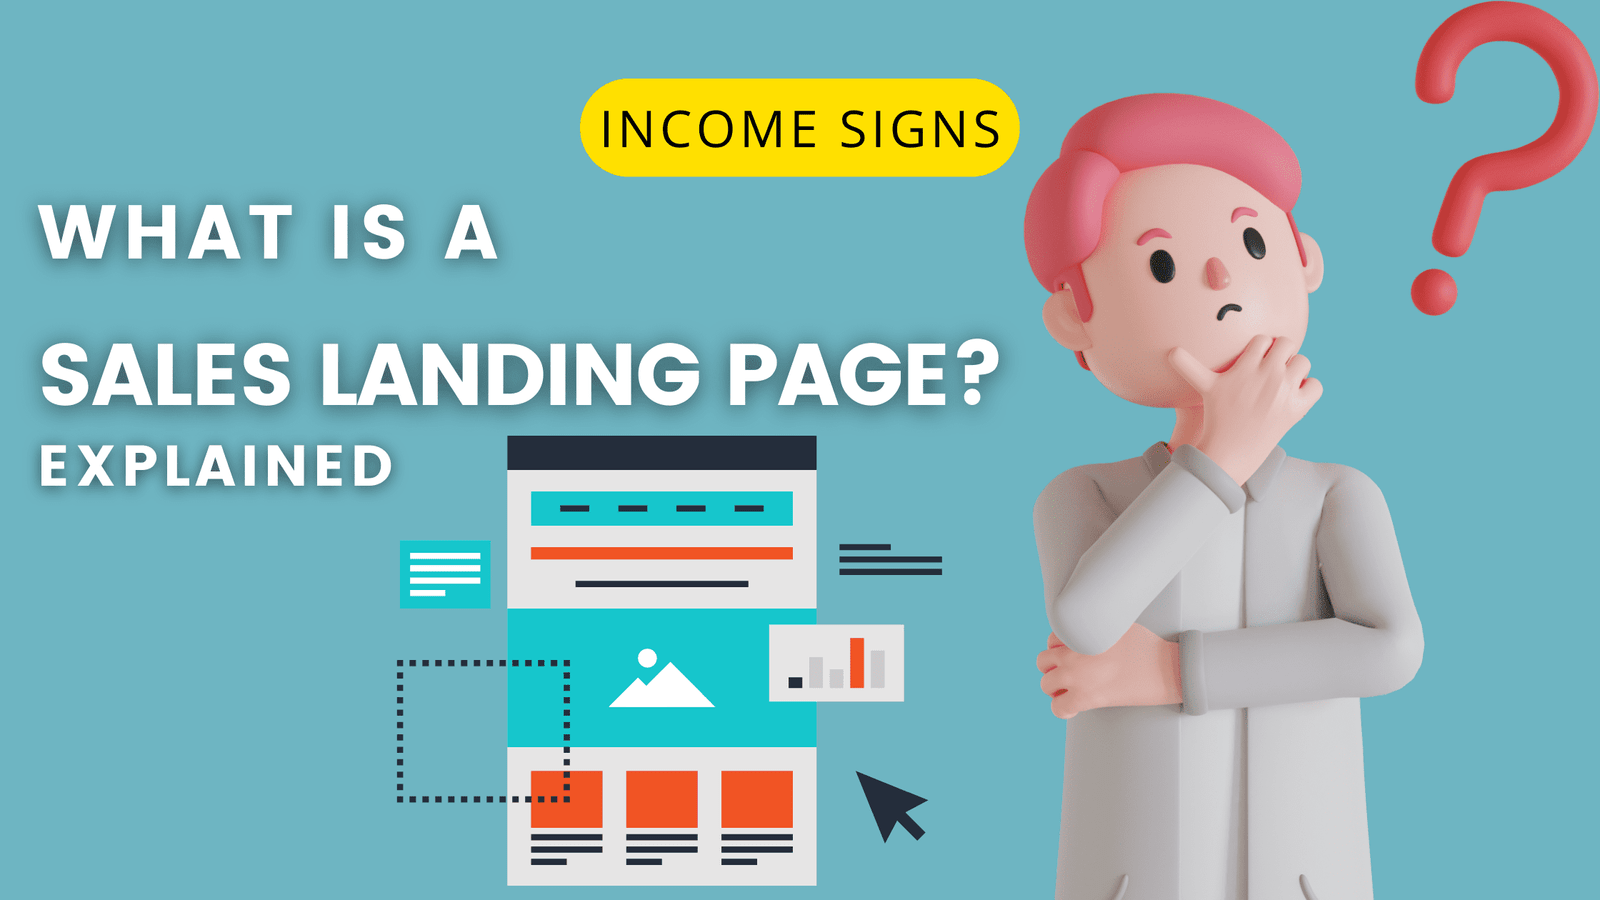 What Is a Sales Landing Page